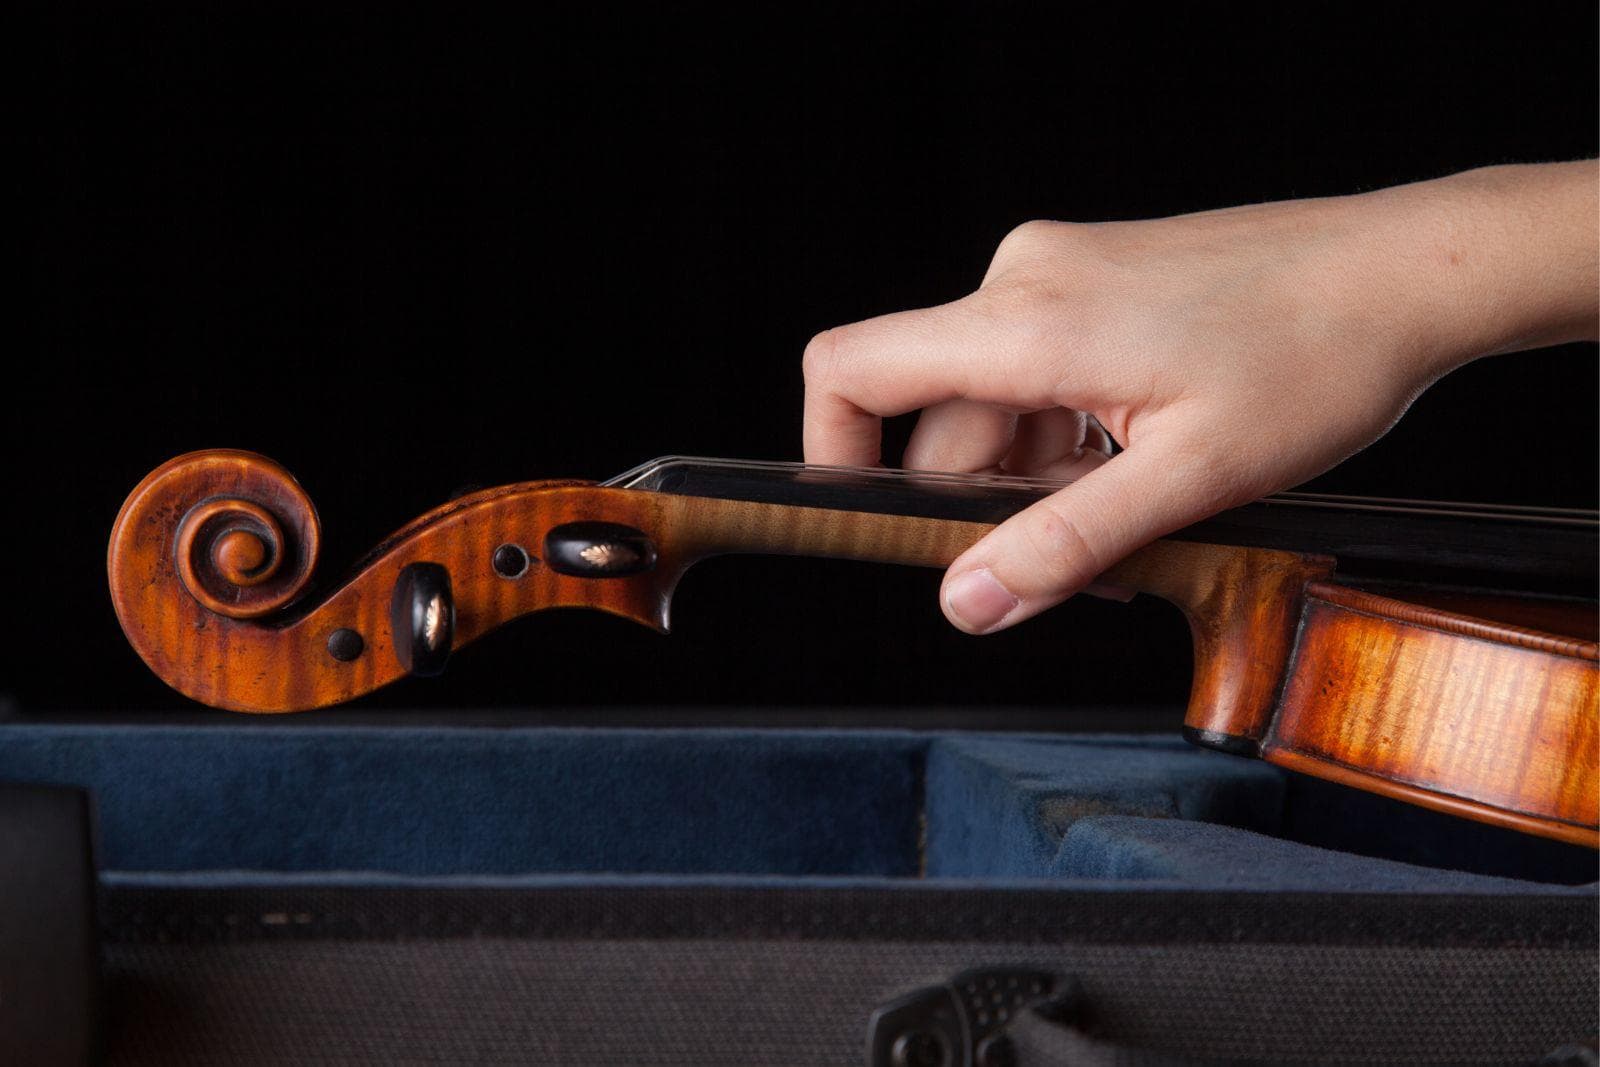 A hand picks up a violin from it's case.